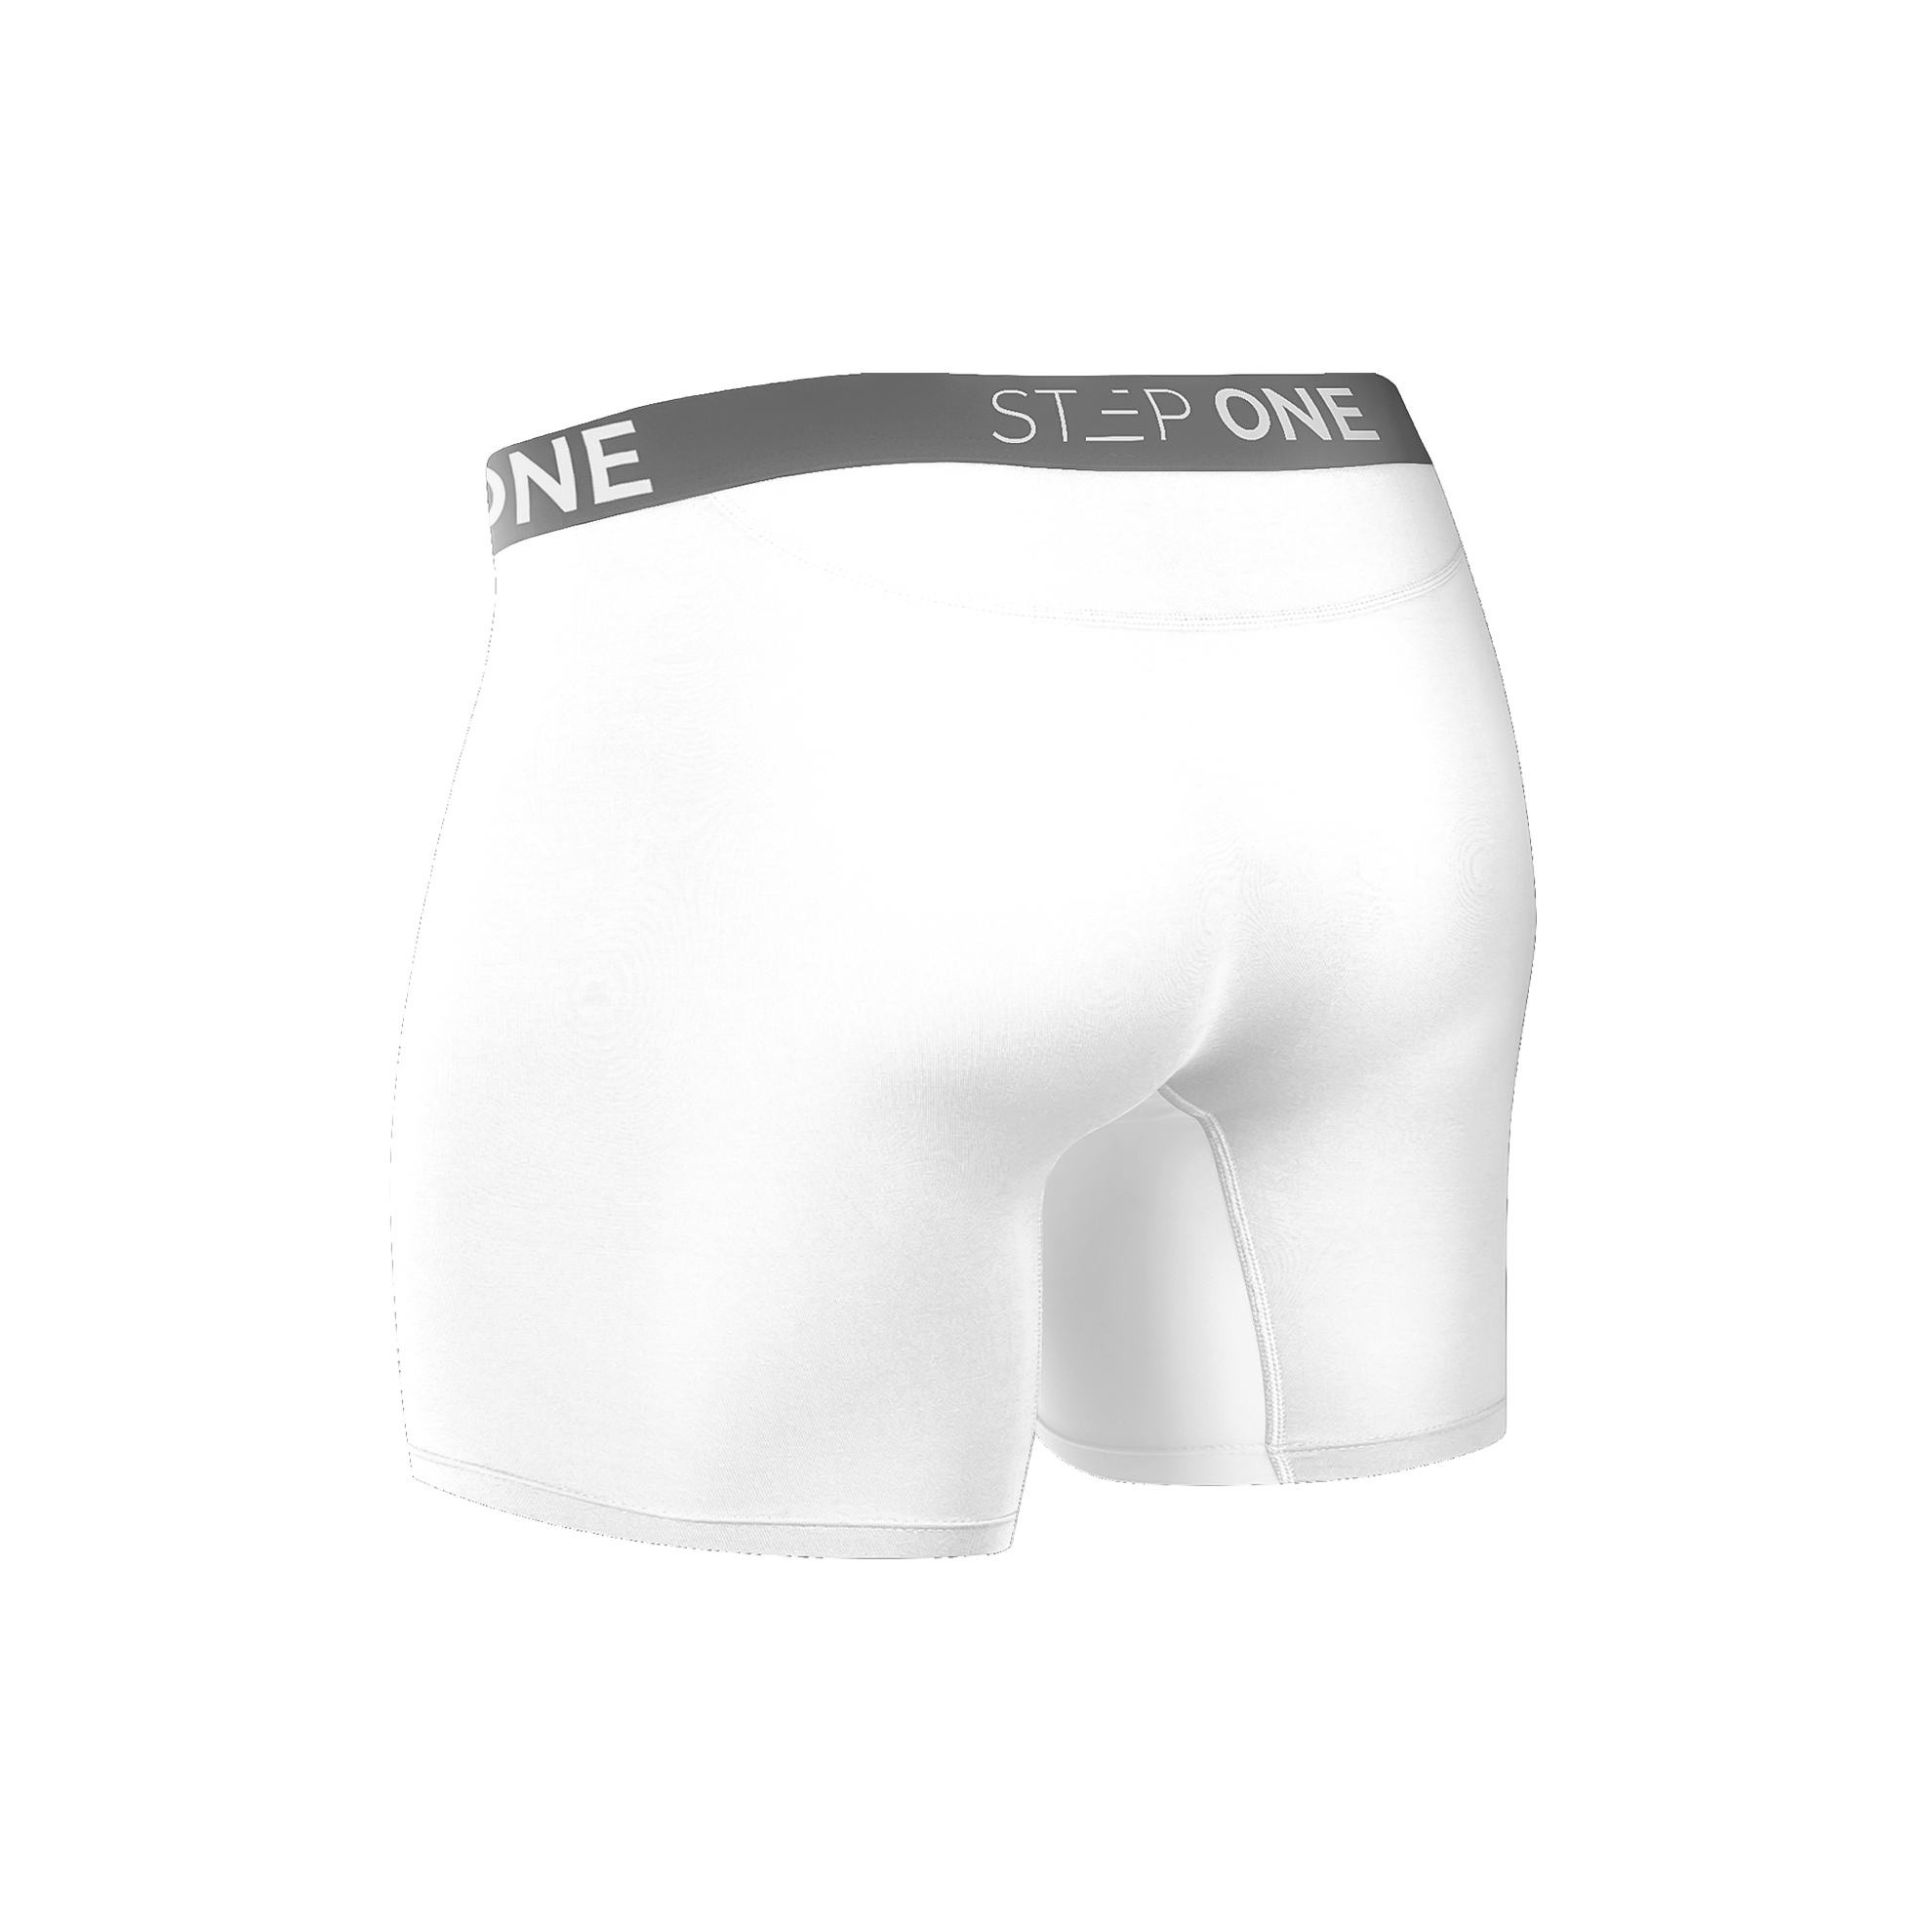 SLSA has partnered with @stepone.life to make a very special edition -  lifesaving underwear to help raise funds for Surf Life Saving! $5…